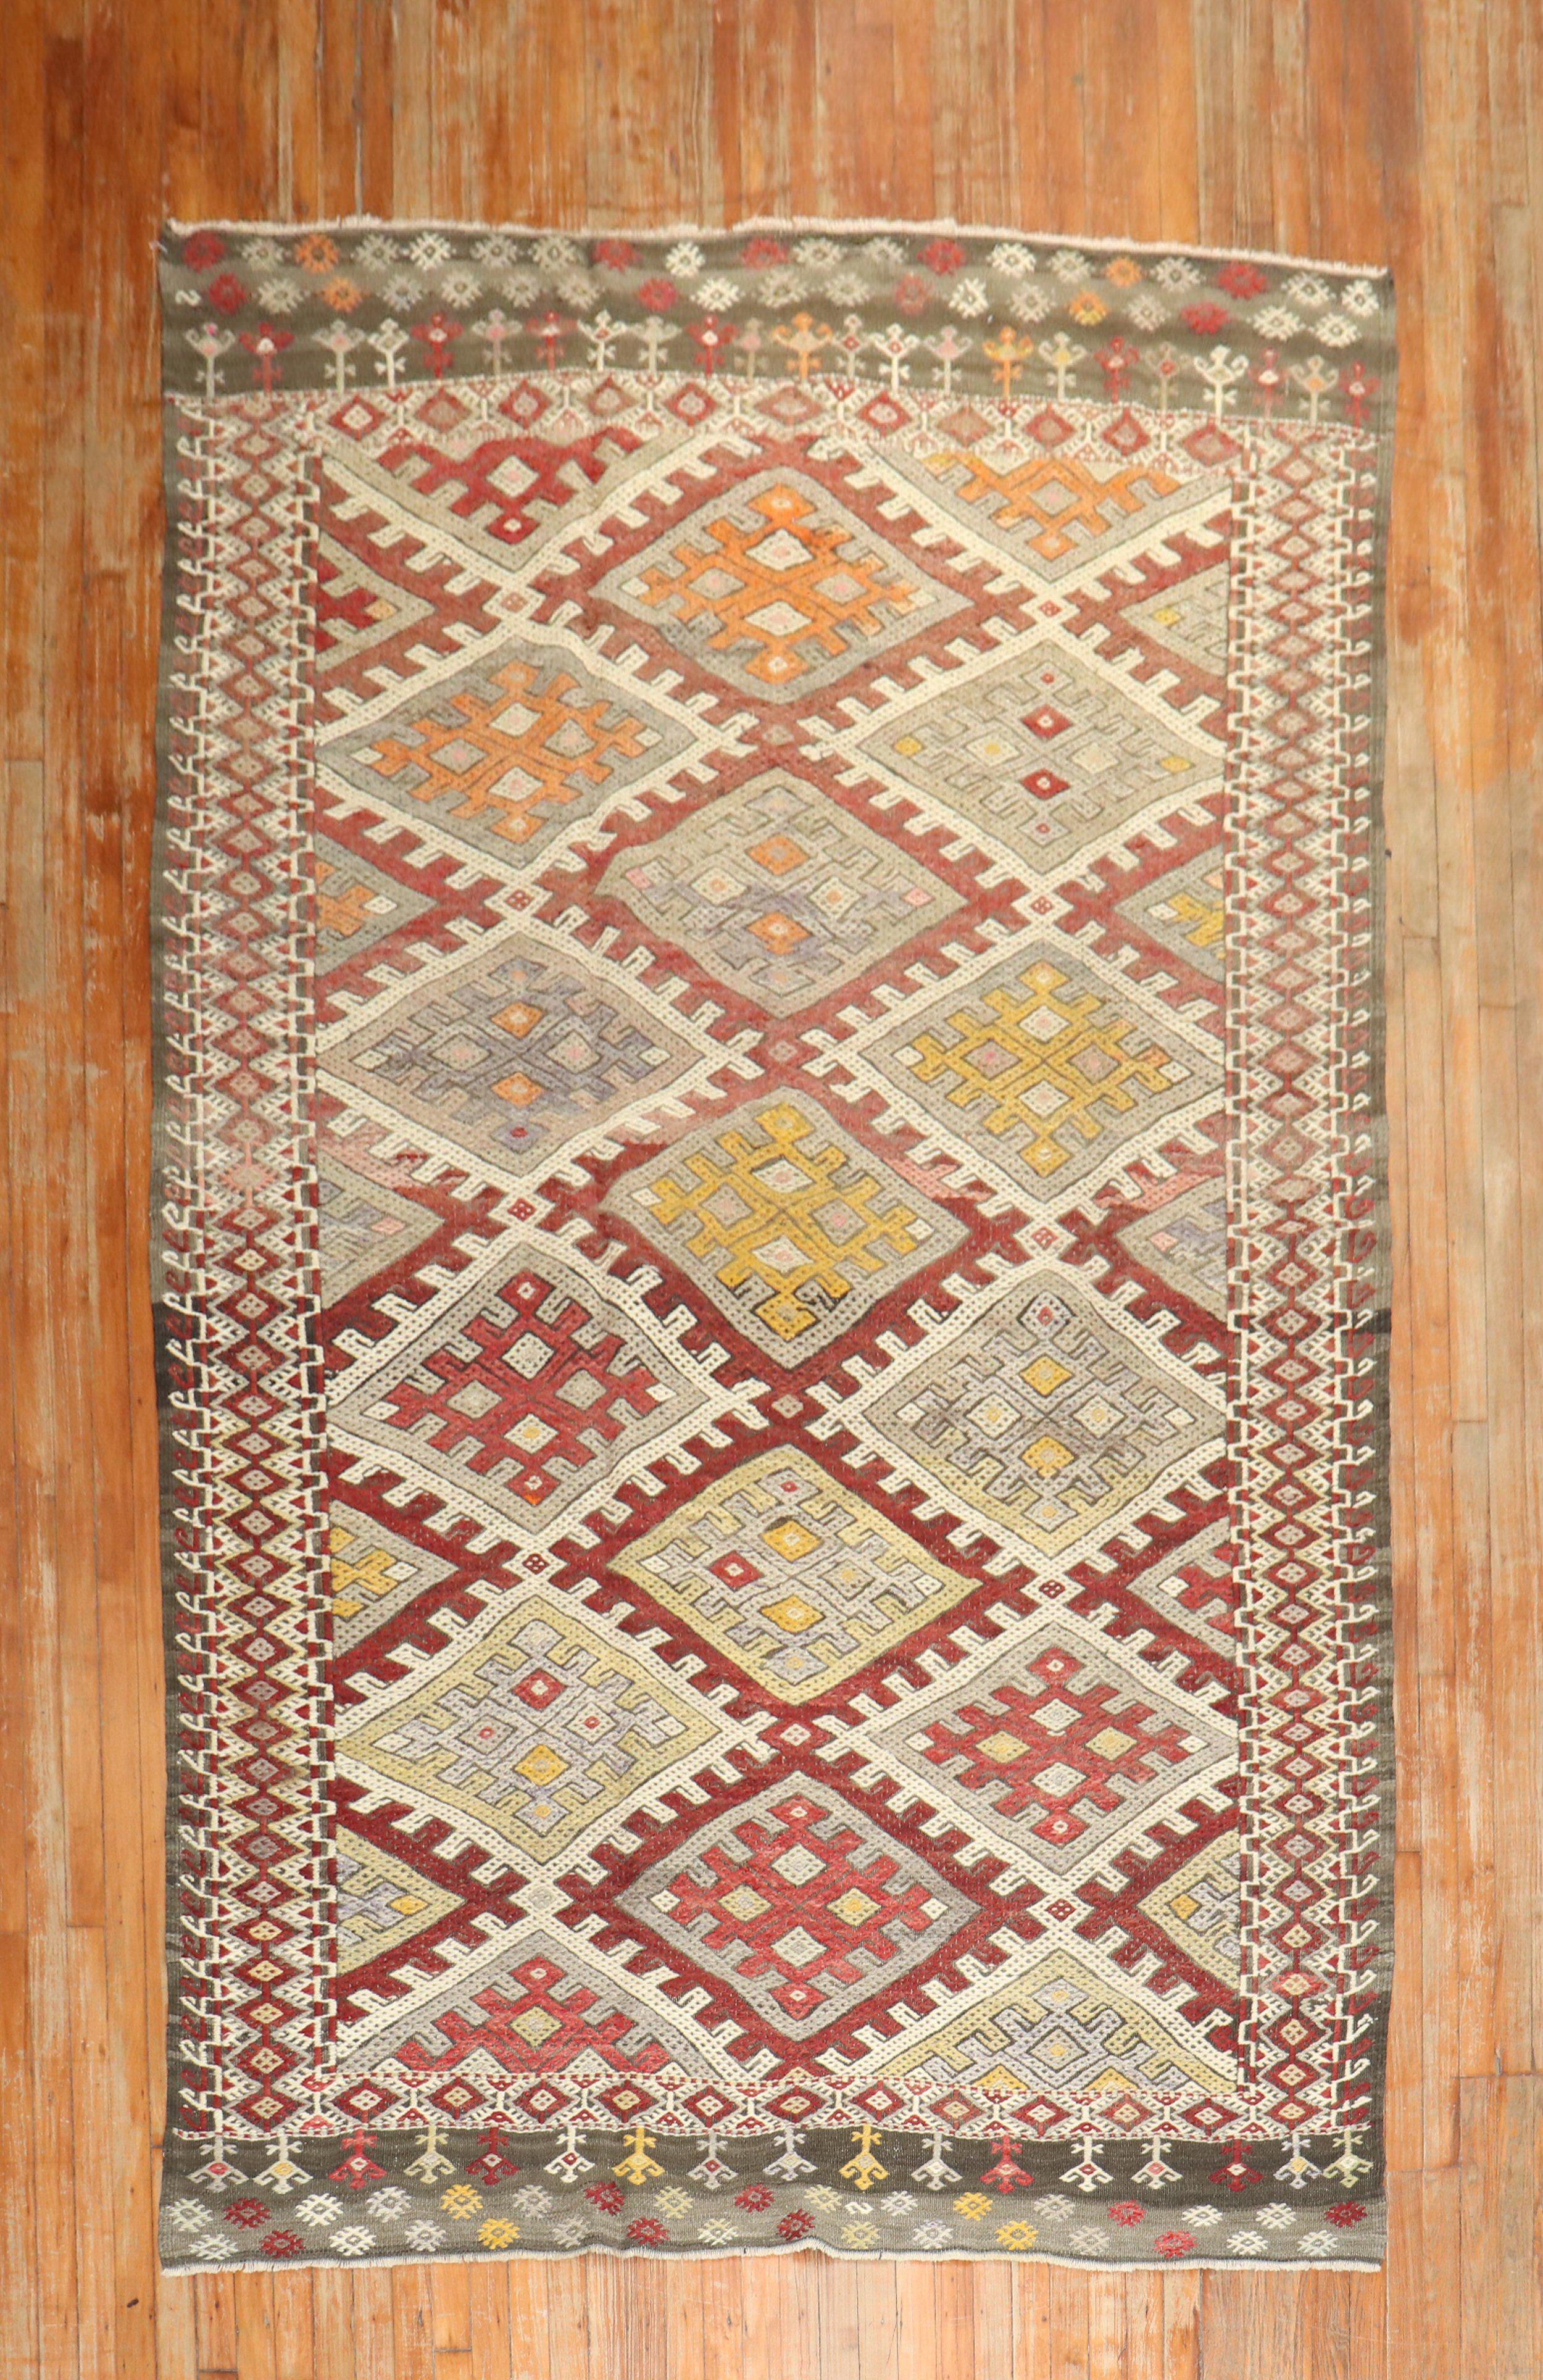 Mid 20th century Tribal Turkish Jajim kilim with a geometric desing with rustic colors

Measures: 6'11” x 10'5”

With the Jijim weaving technique, different colored threads are applied between the weft and warp threads, on the reverse of the